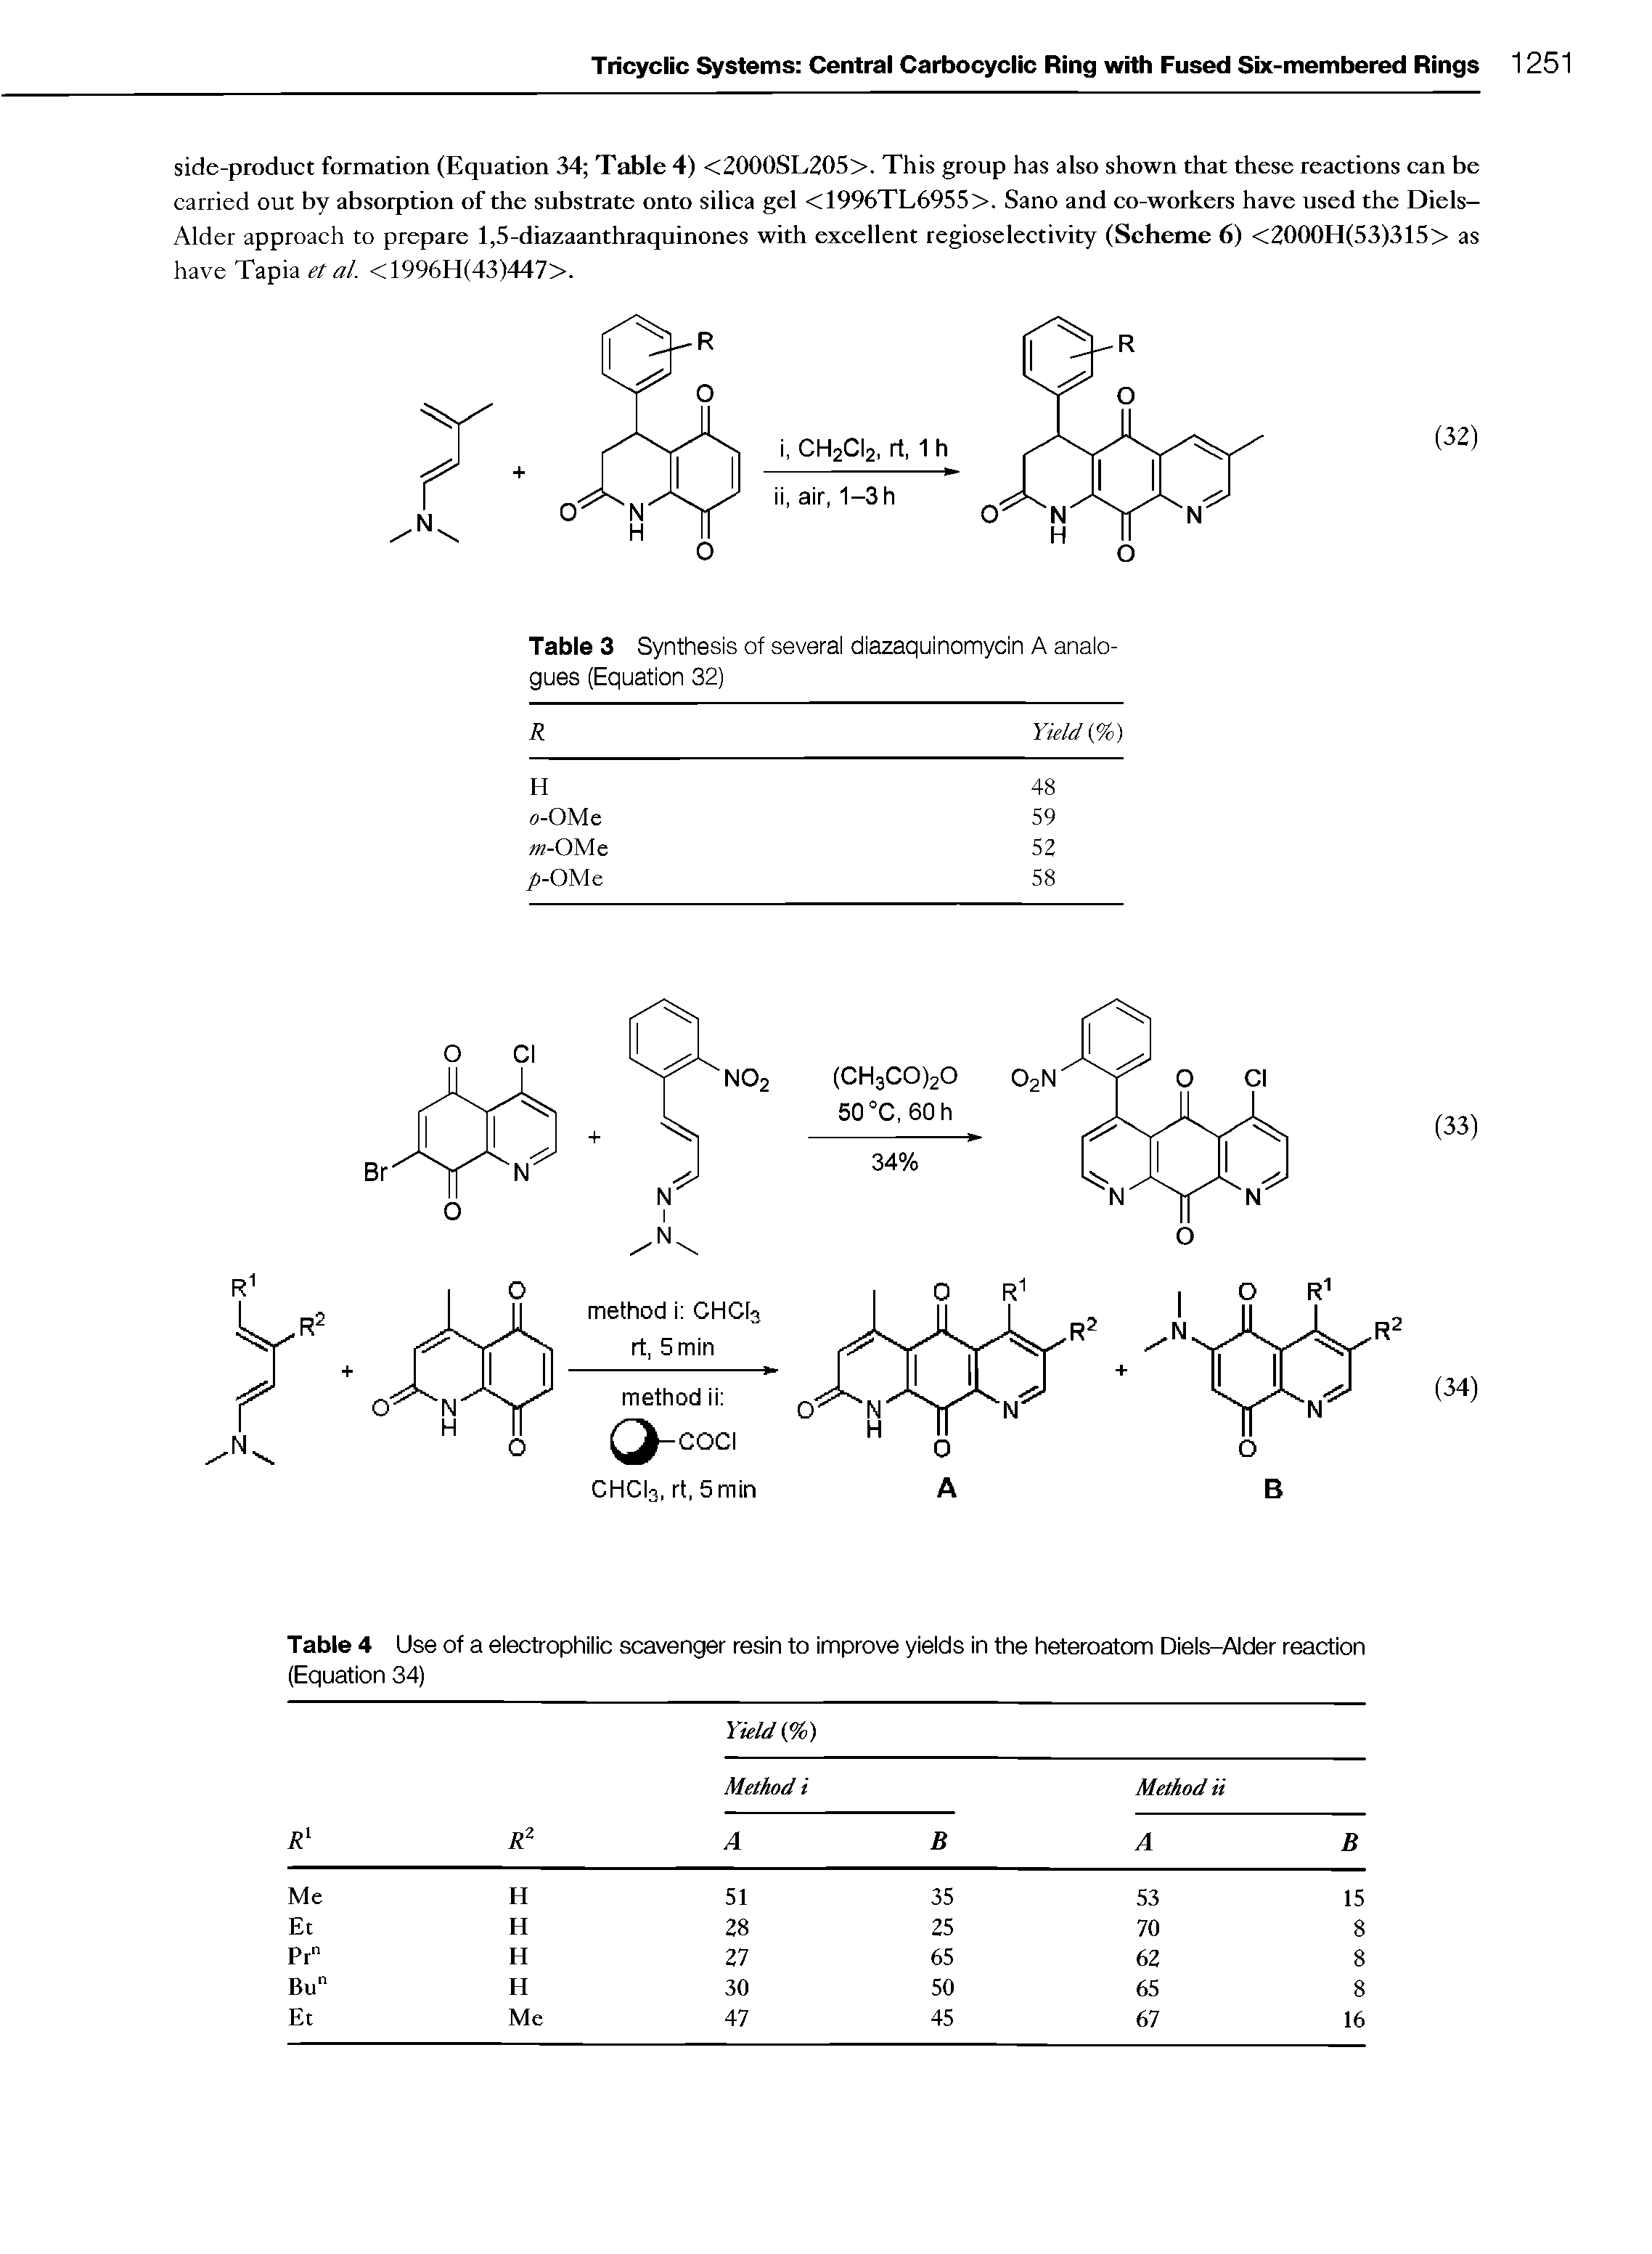 Table 4 Use of a electrophilic scavenger resin to improve yields in the heteroatom Diels-Alder reaction (Equation 34)...